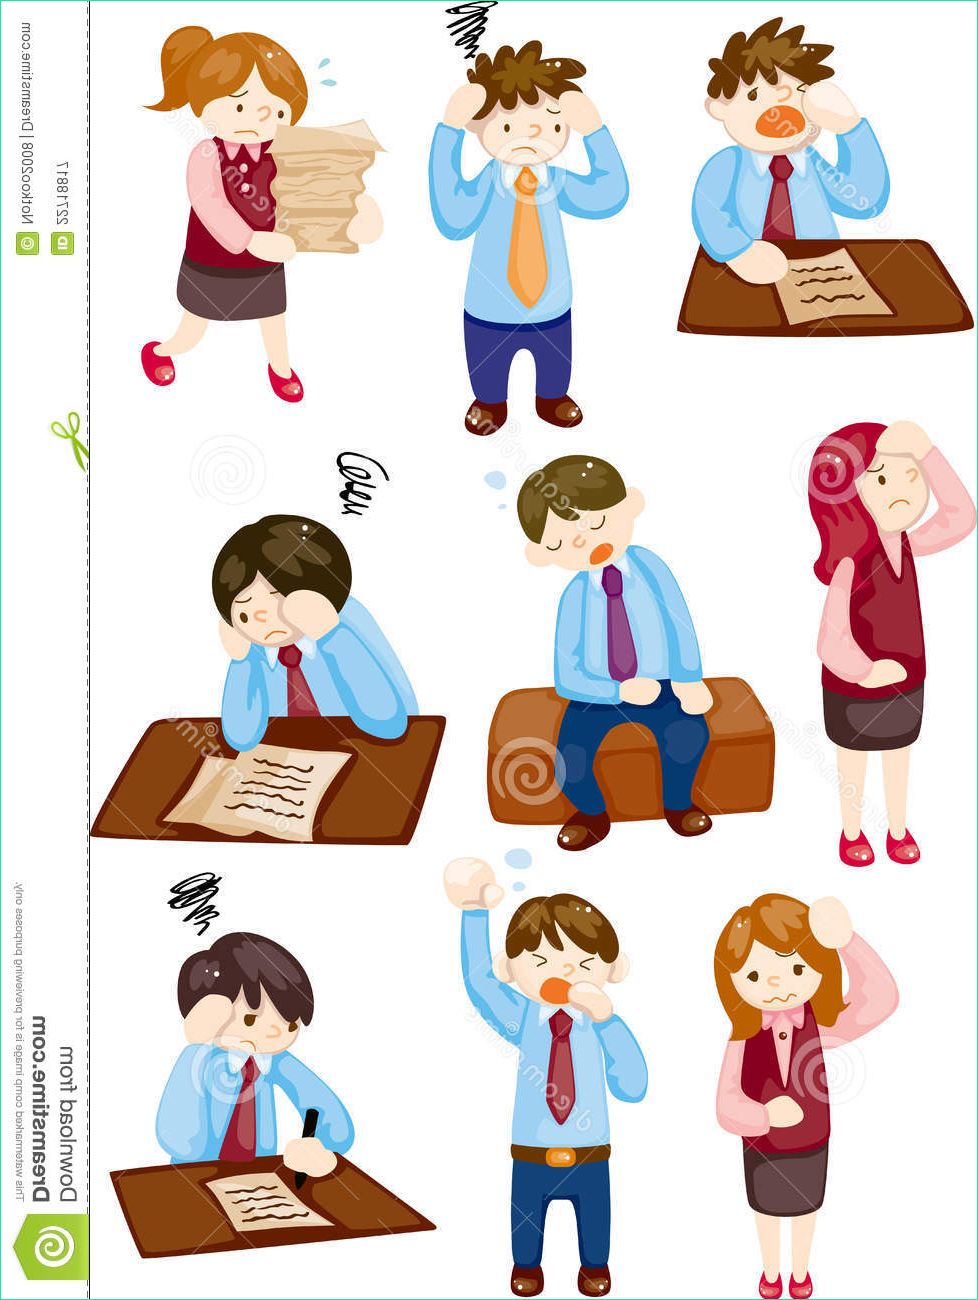 royalty free stock photography cartoon tired businessman image